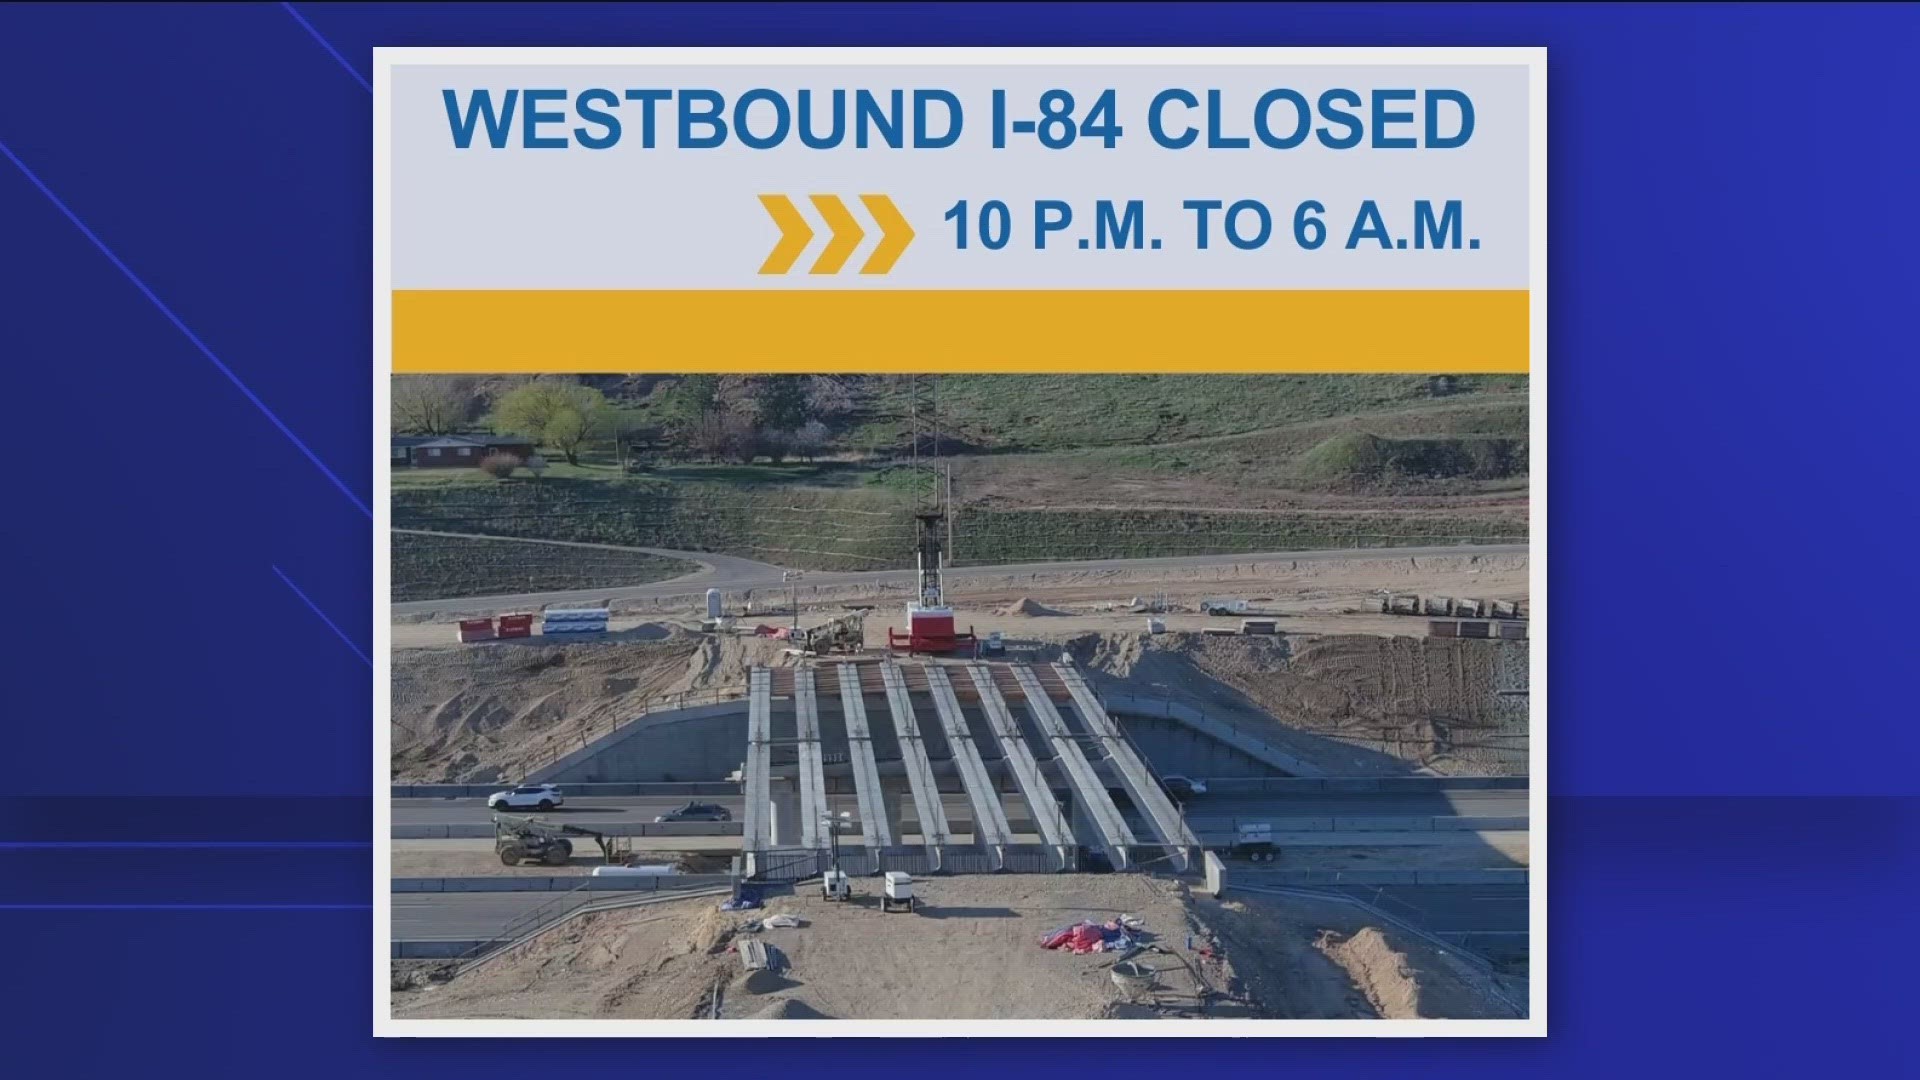 Lanes will be closed between Ten Mile Road and Garrity Boulevard until 6 a.m. Friday for construction of the future I-84 and State Highway 16 interchange.